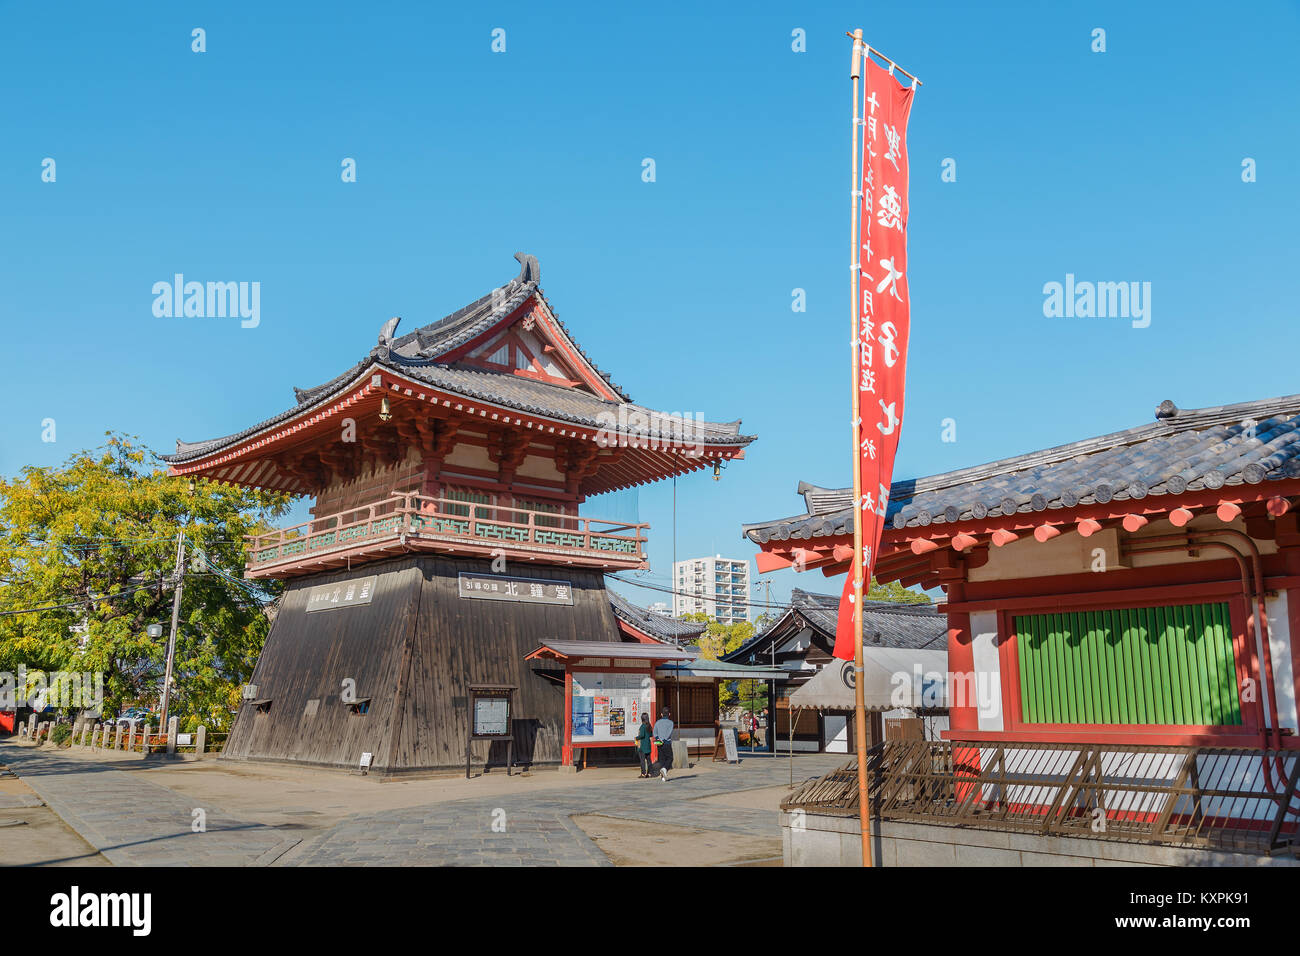 The North Bell Tower at Shitennoji Temple in Osaka, Japan  OSAKA, JAPAN - OCTOBER 24:  Shitennoji Temple in Osaka, Japan on October 24, 2014. The nort Stock Photo